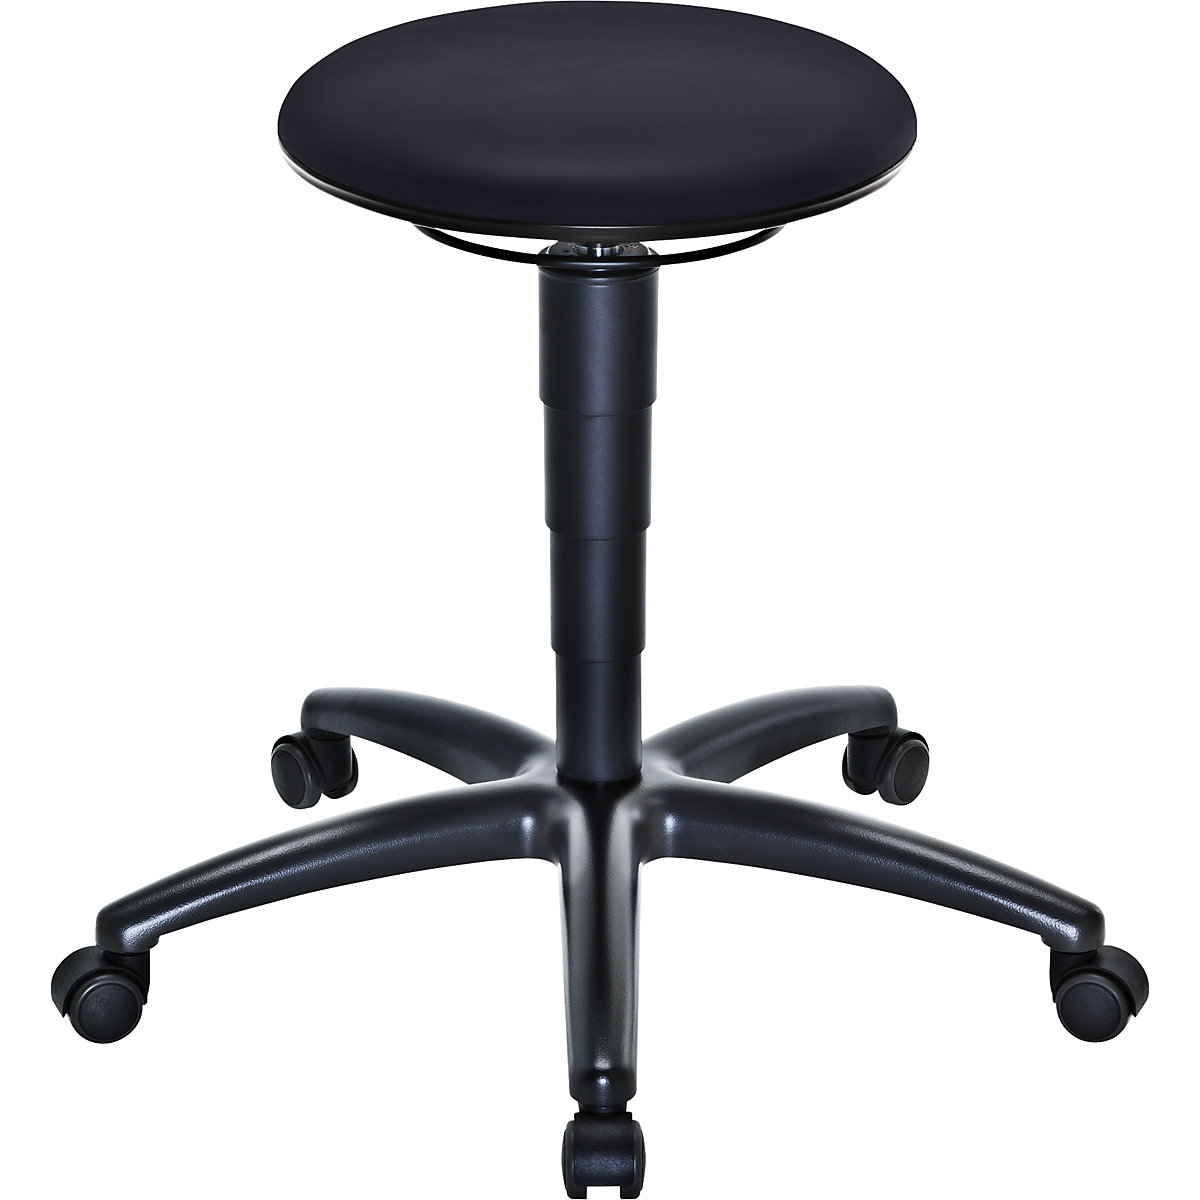 Industrial stool with gas lift height adjustment – eurokraft pro, black vinyl seat, with castors-1